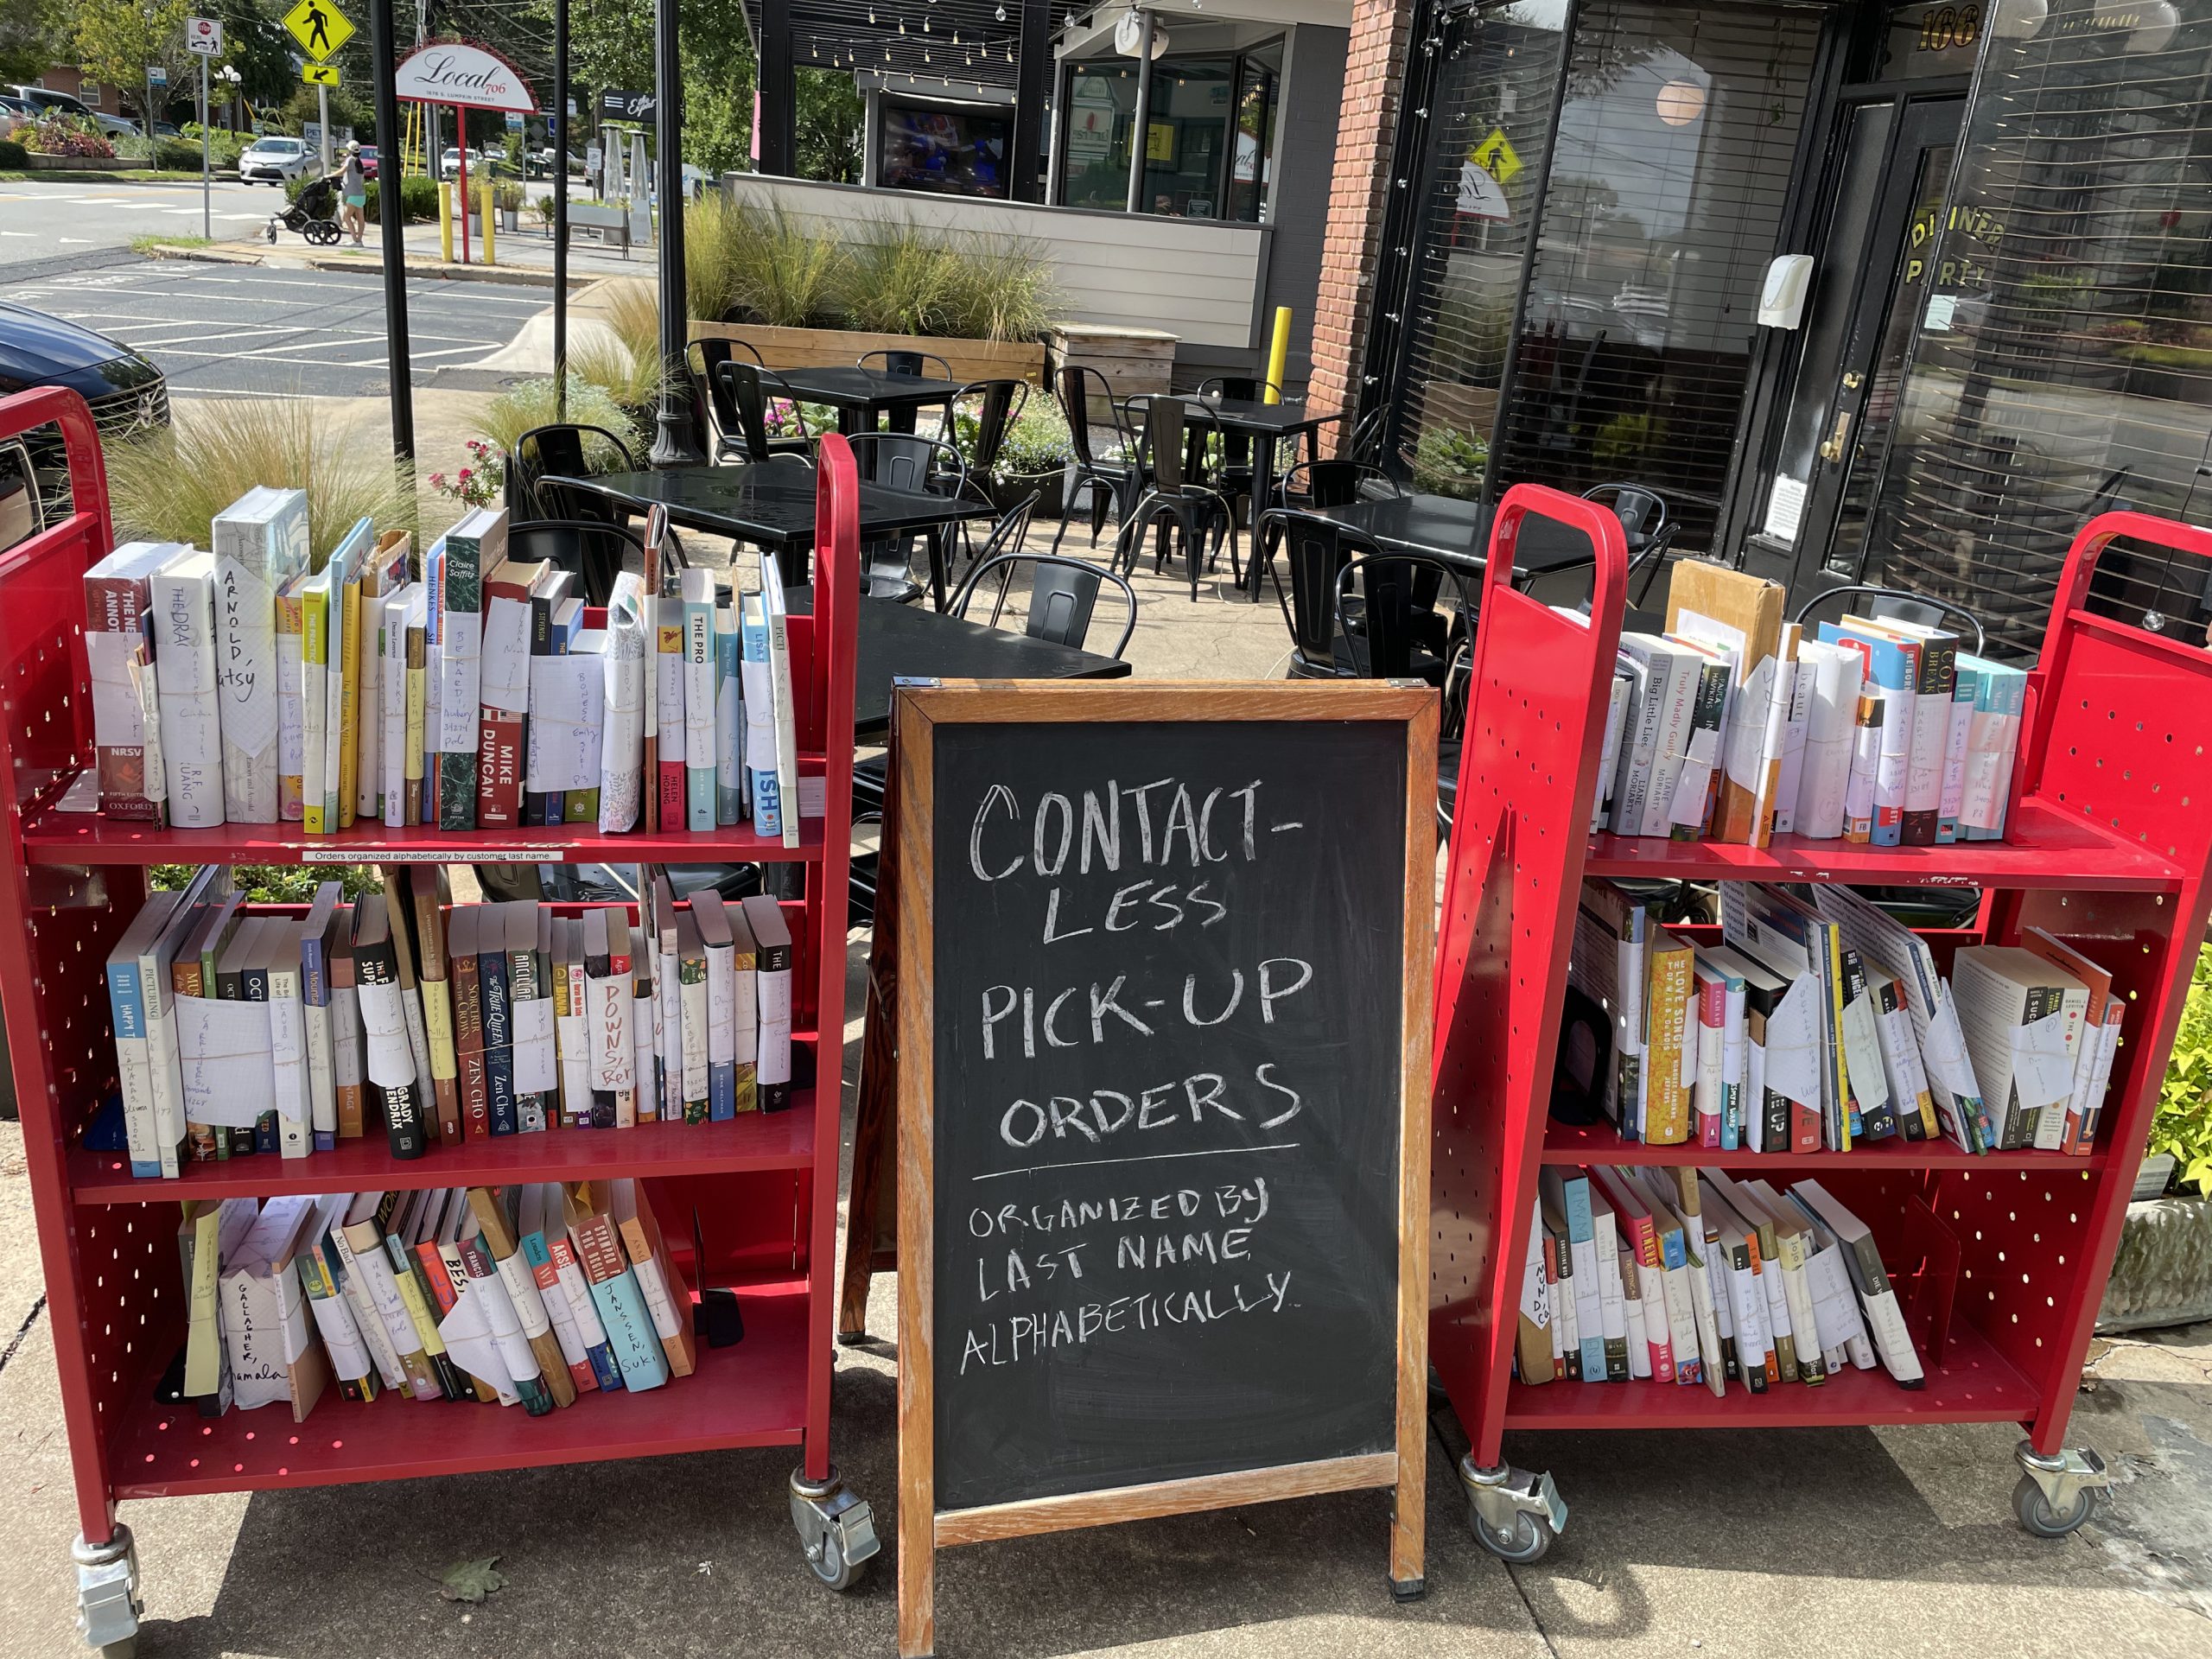 Two red carts loaded with books sit behind a chalkboard sign.